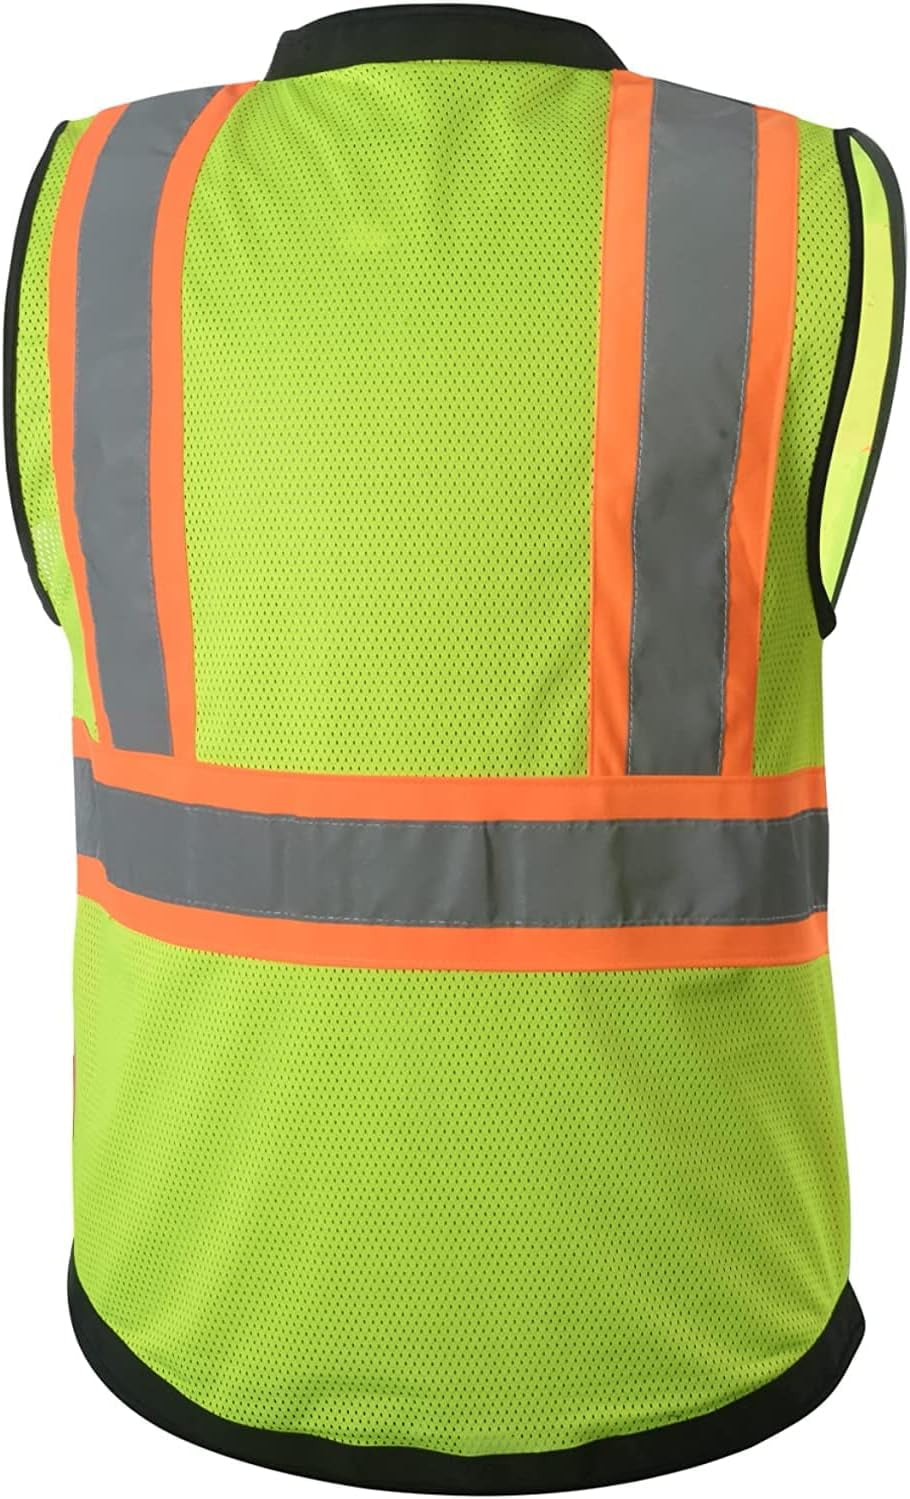 "Stay Visible and Safe with the  Surveyor Black/Lime Two Tone Safety Vest - ANSI/ISEA 107-2015 Certified with Photo ID Pocket!"